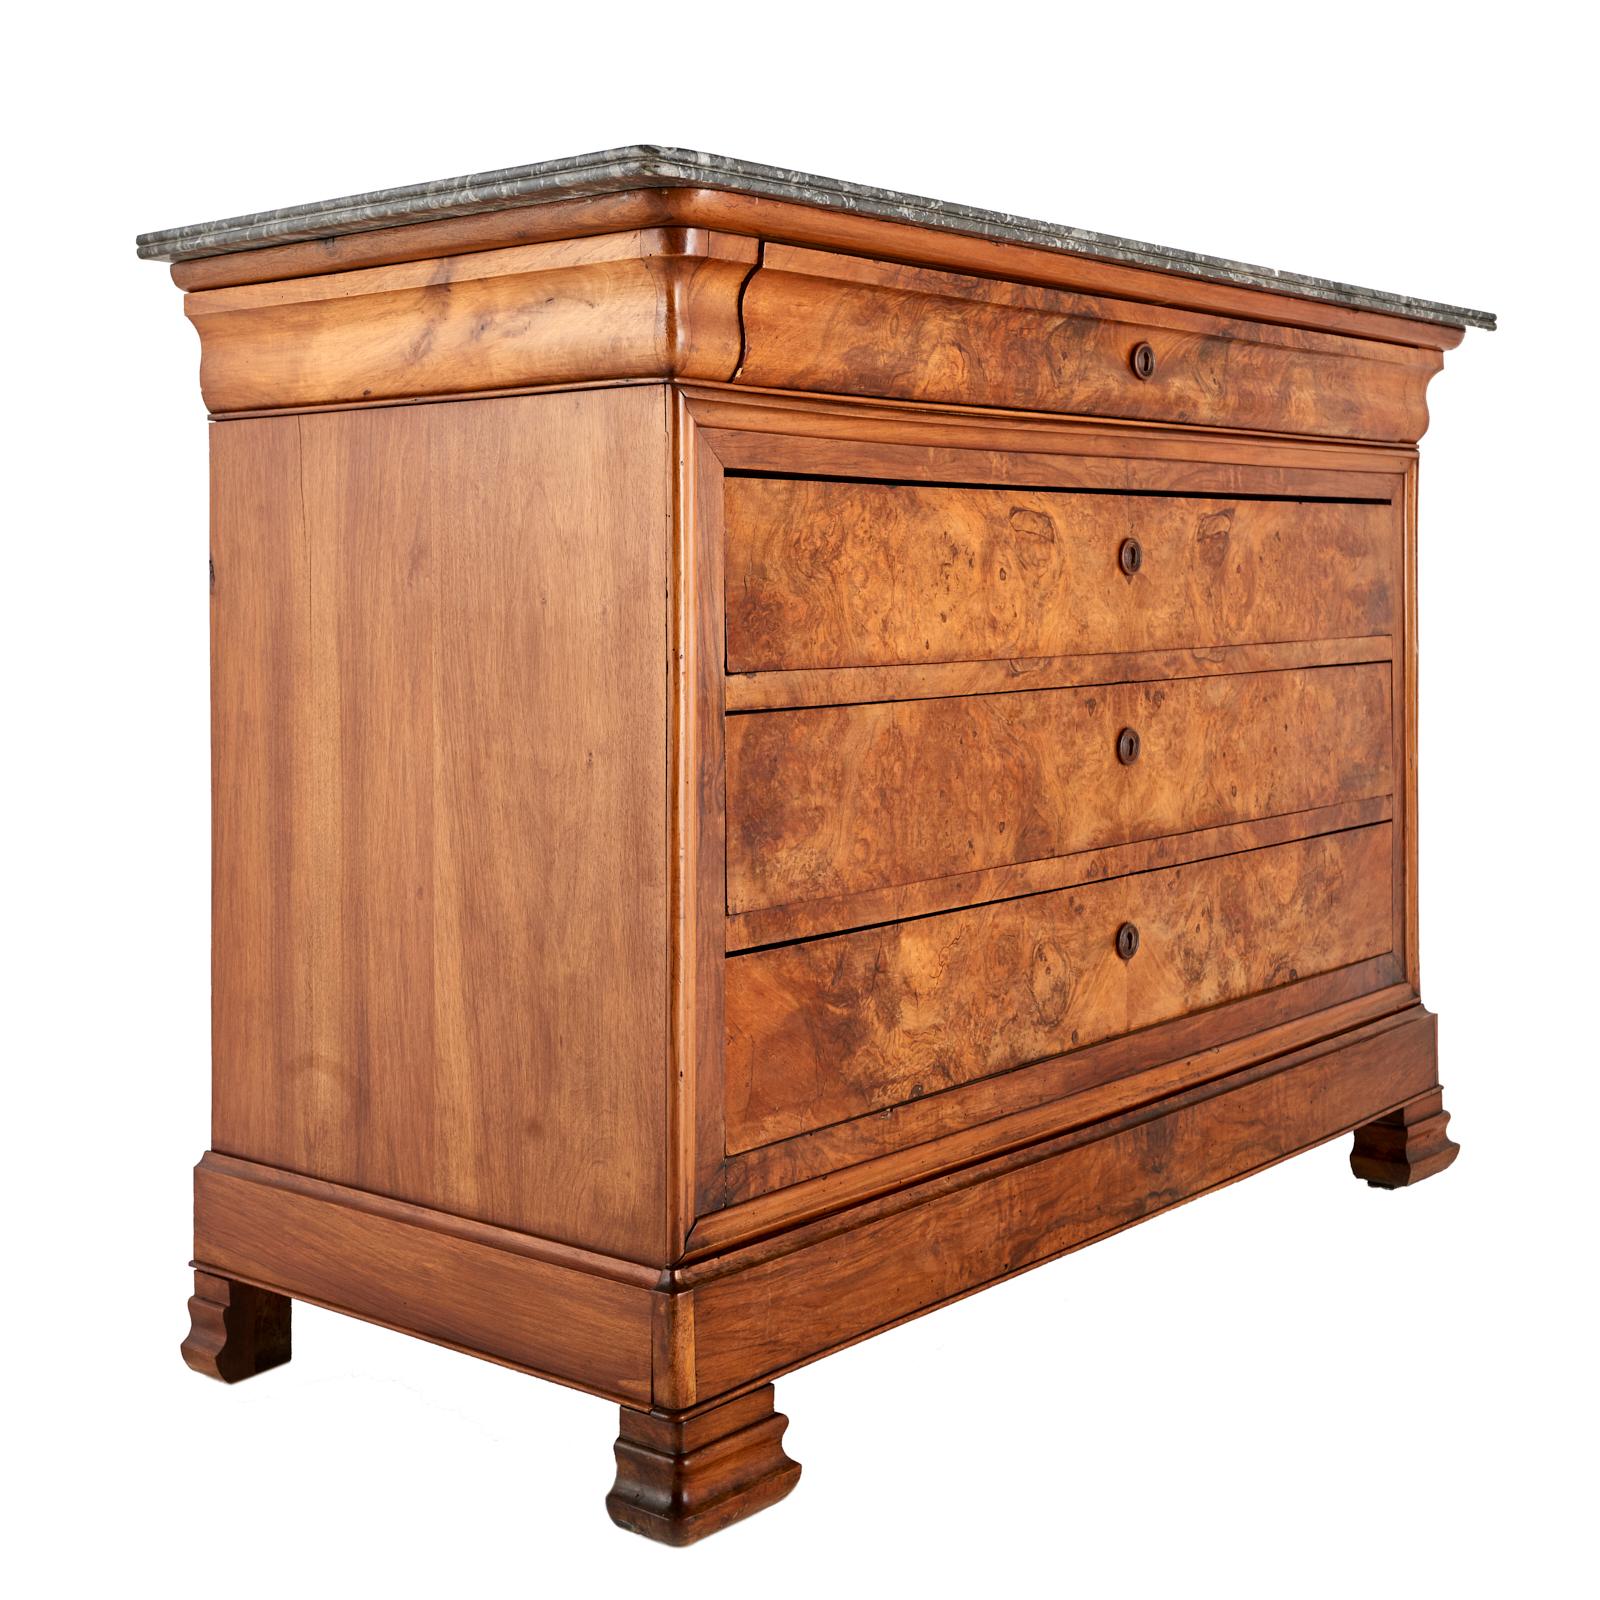 A French walnut Louis Philippe four drawer commode, the drawer fronts veneered in dramatic book-matched burl walnut, the top with its original grey marble top.